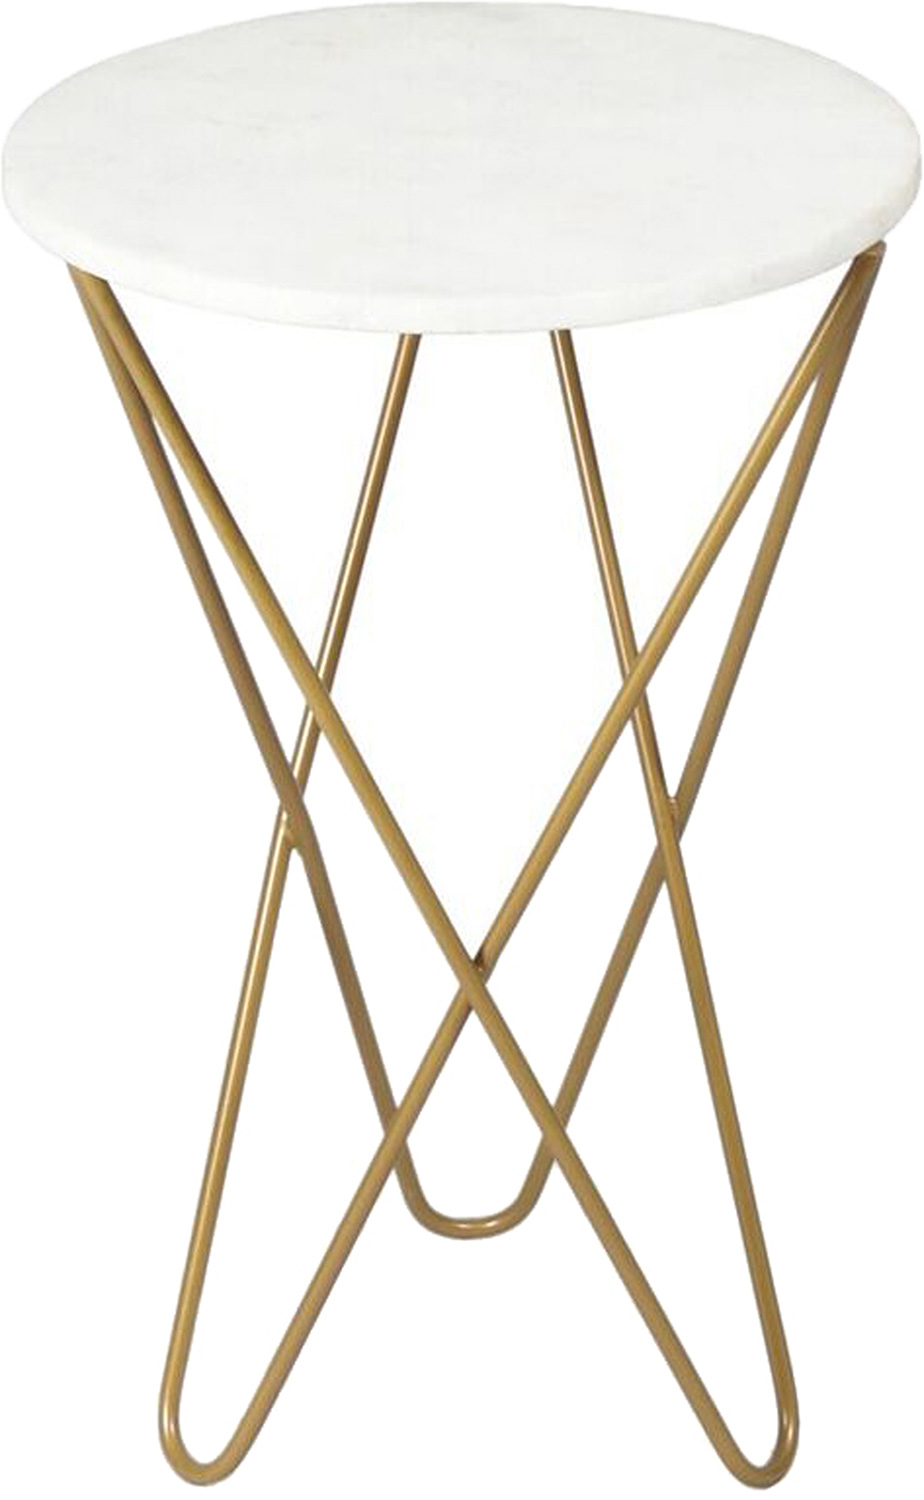 Ren-Wil Cinda Accent Table - Gold Powdercoated